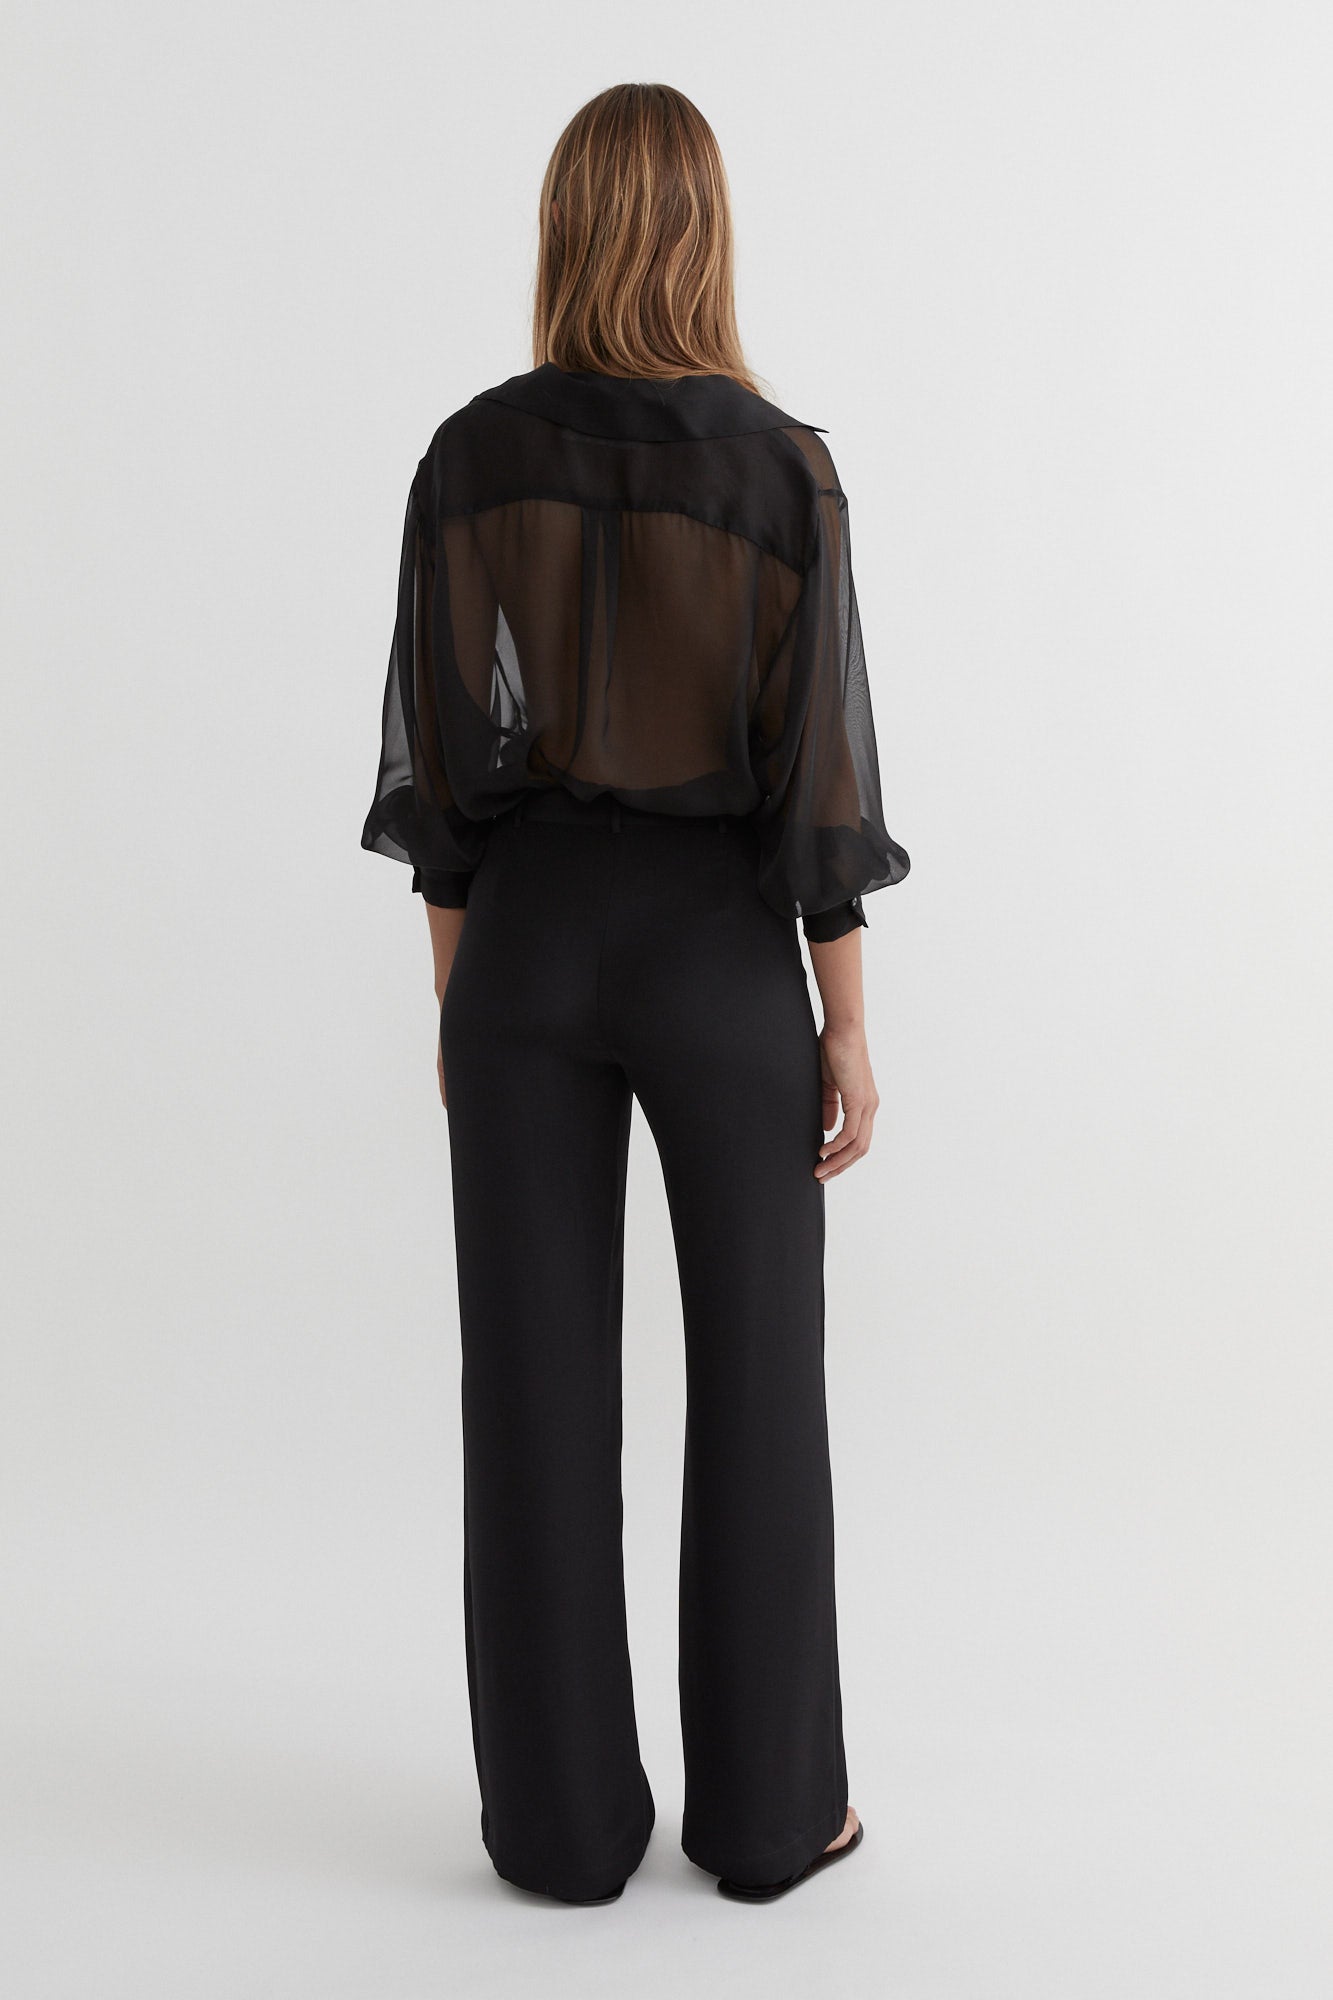 SAINT Lookbook Black Silk Pants, the perfect dressy going out pant. Made in Australia